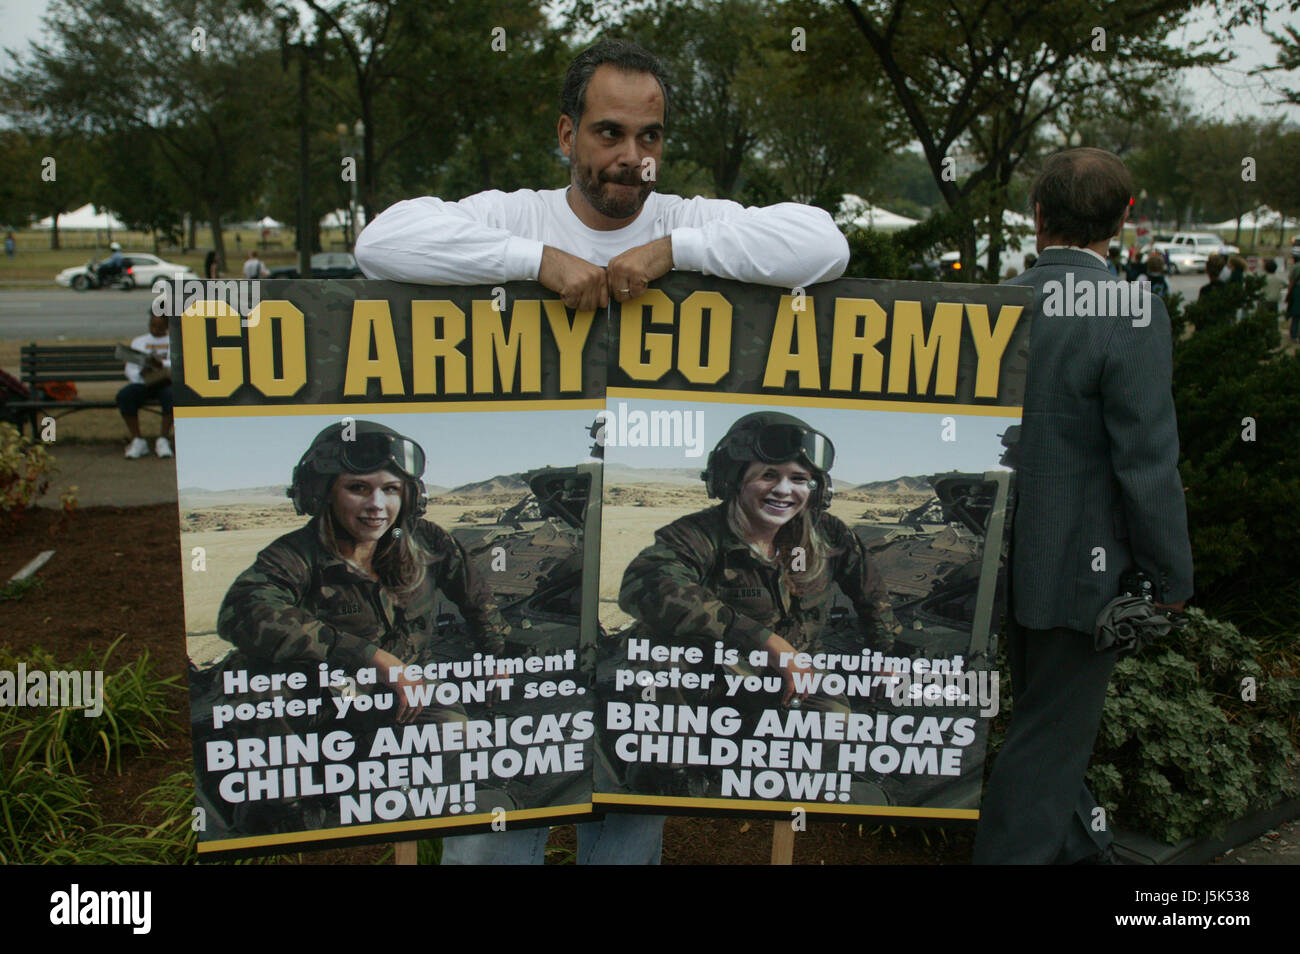 A protester displays protest signs depicting the Bush twins as the models for an Army recruiting advertisement the anti-war march on Washington. Stock Photo